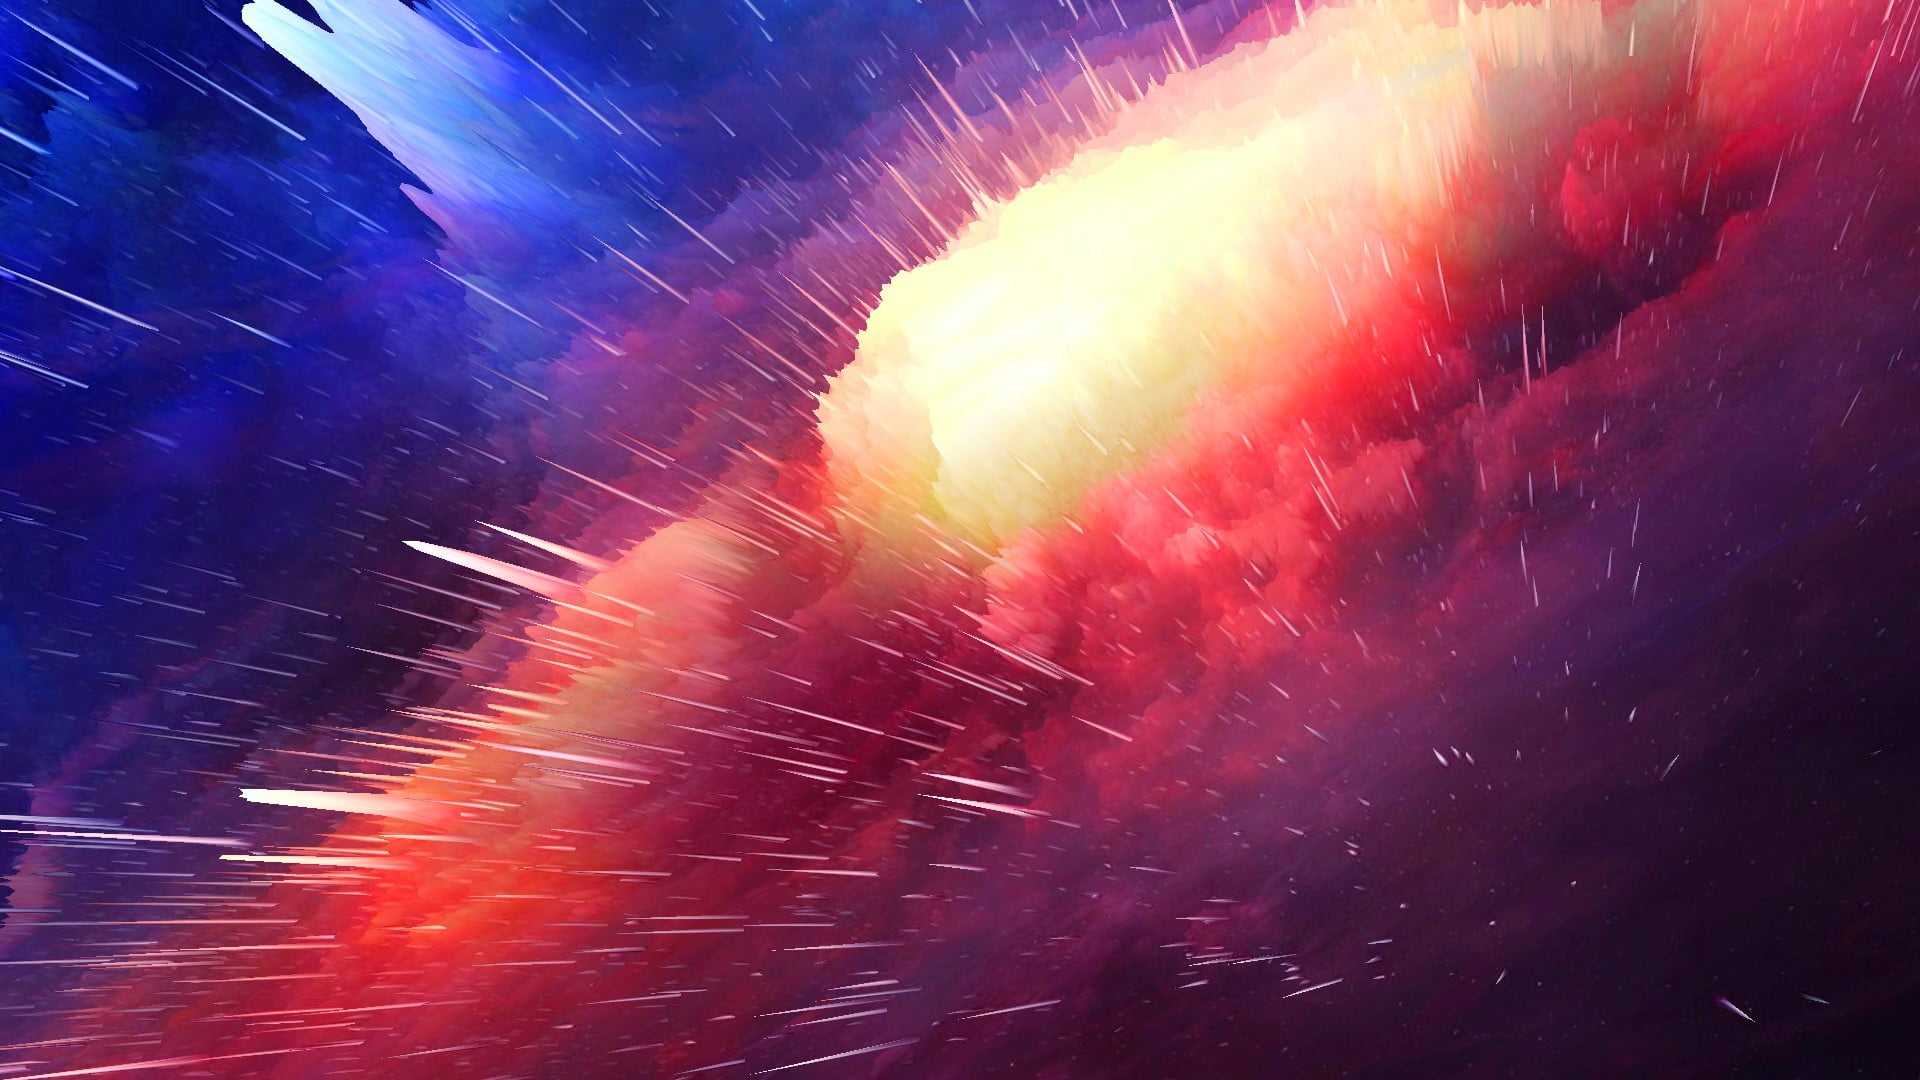 multicolored meteorite, galaxy, explosion, colorful, motion, no people